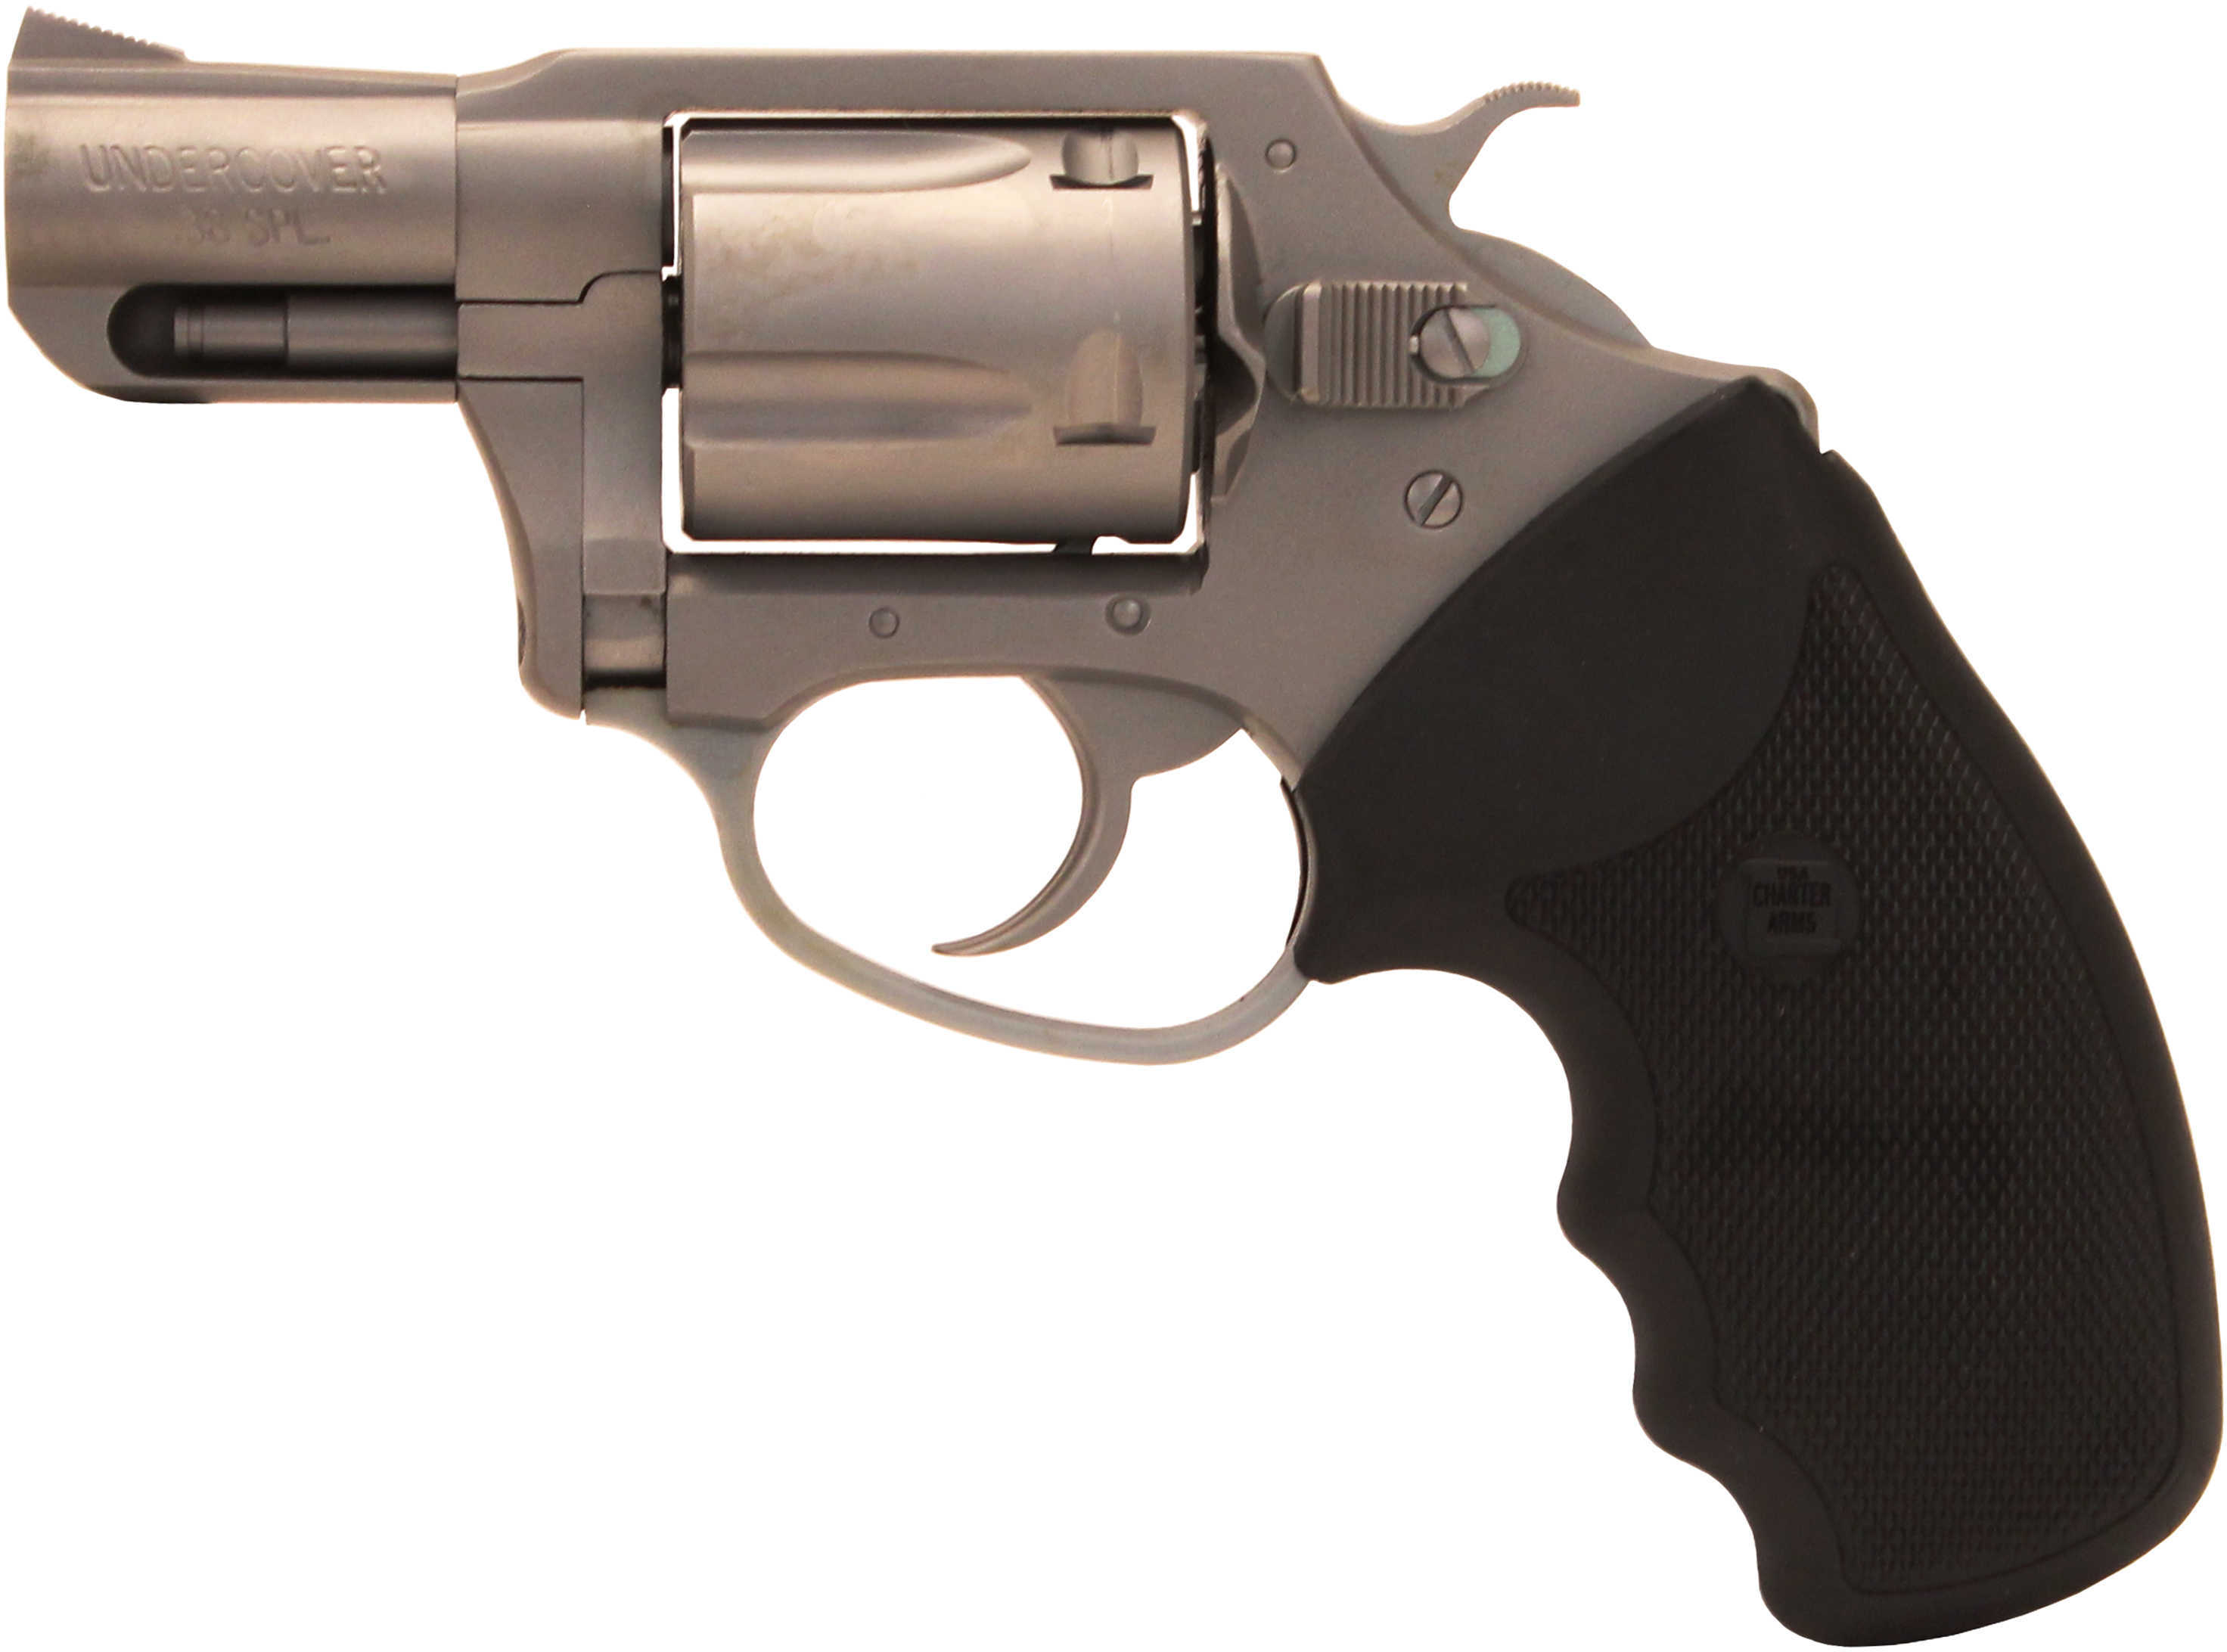 Charter Arms 38 Undercover Special 5 Round 2" Barrel SA/DA Stainless Steel Revolver 73820